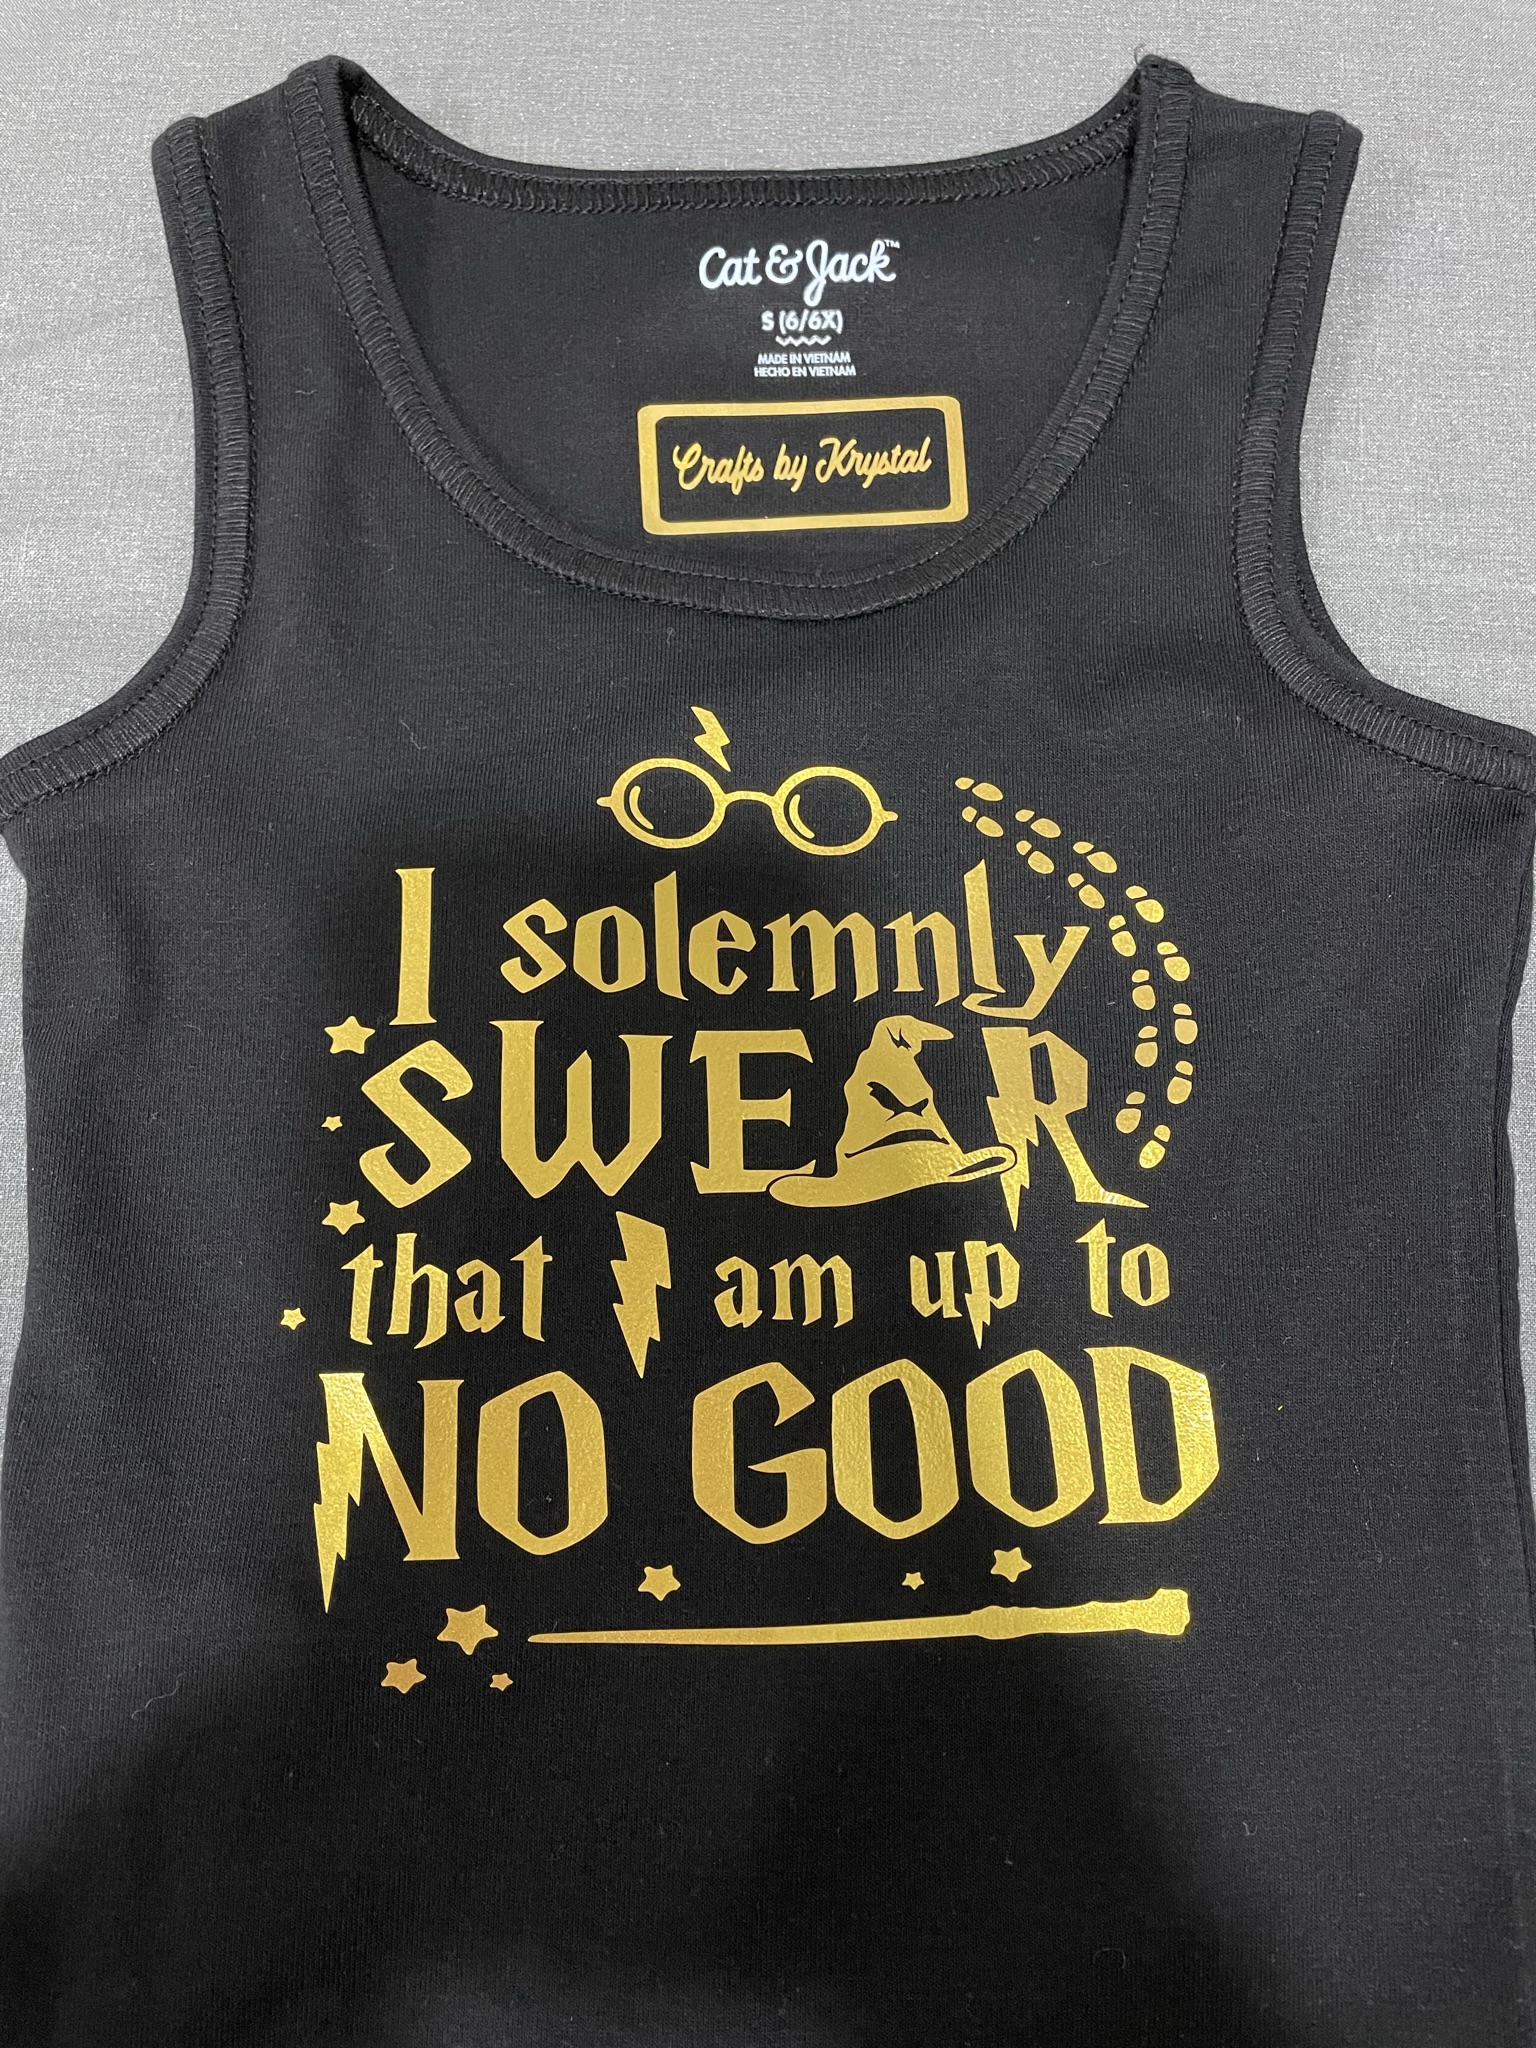 Black tank top with gold design that says "I solemnly swear that I am up to no good" in Harry Potter style